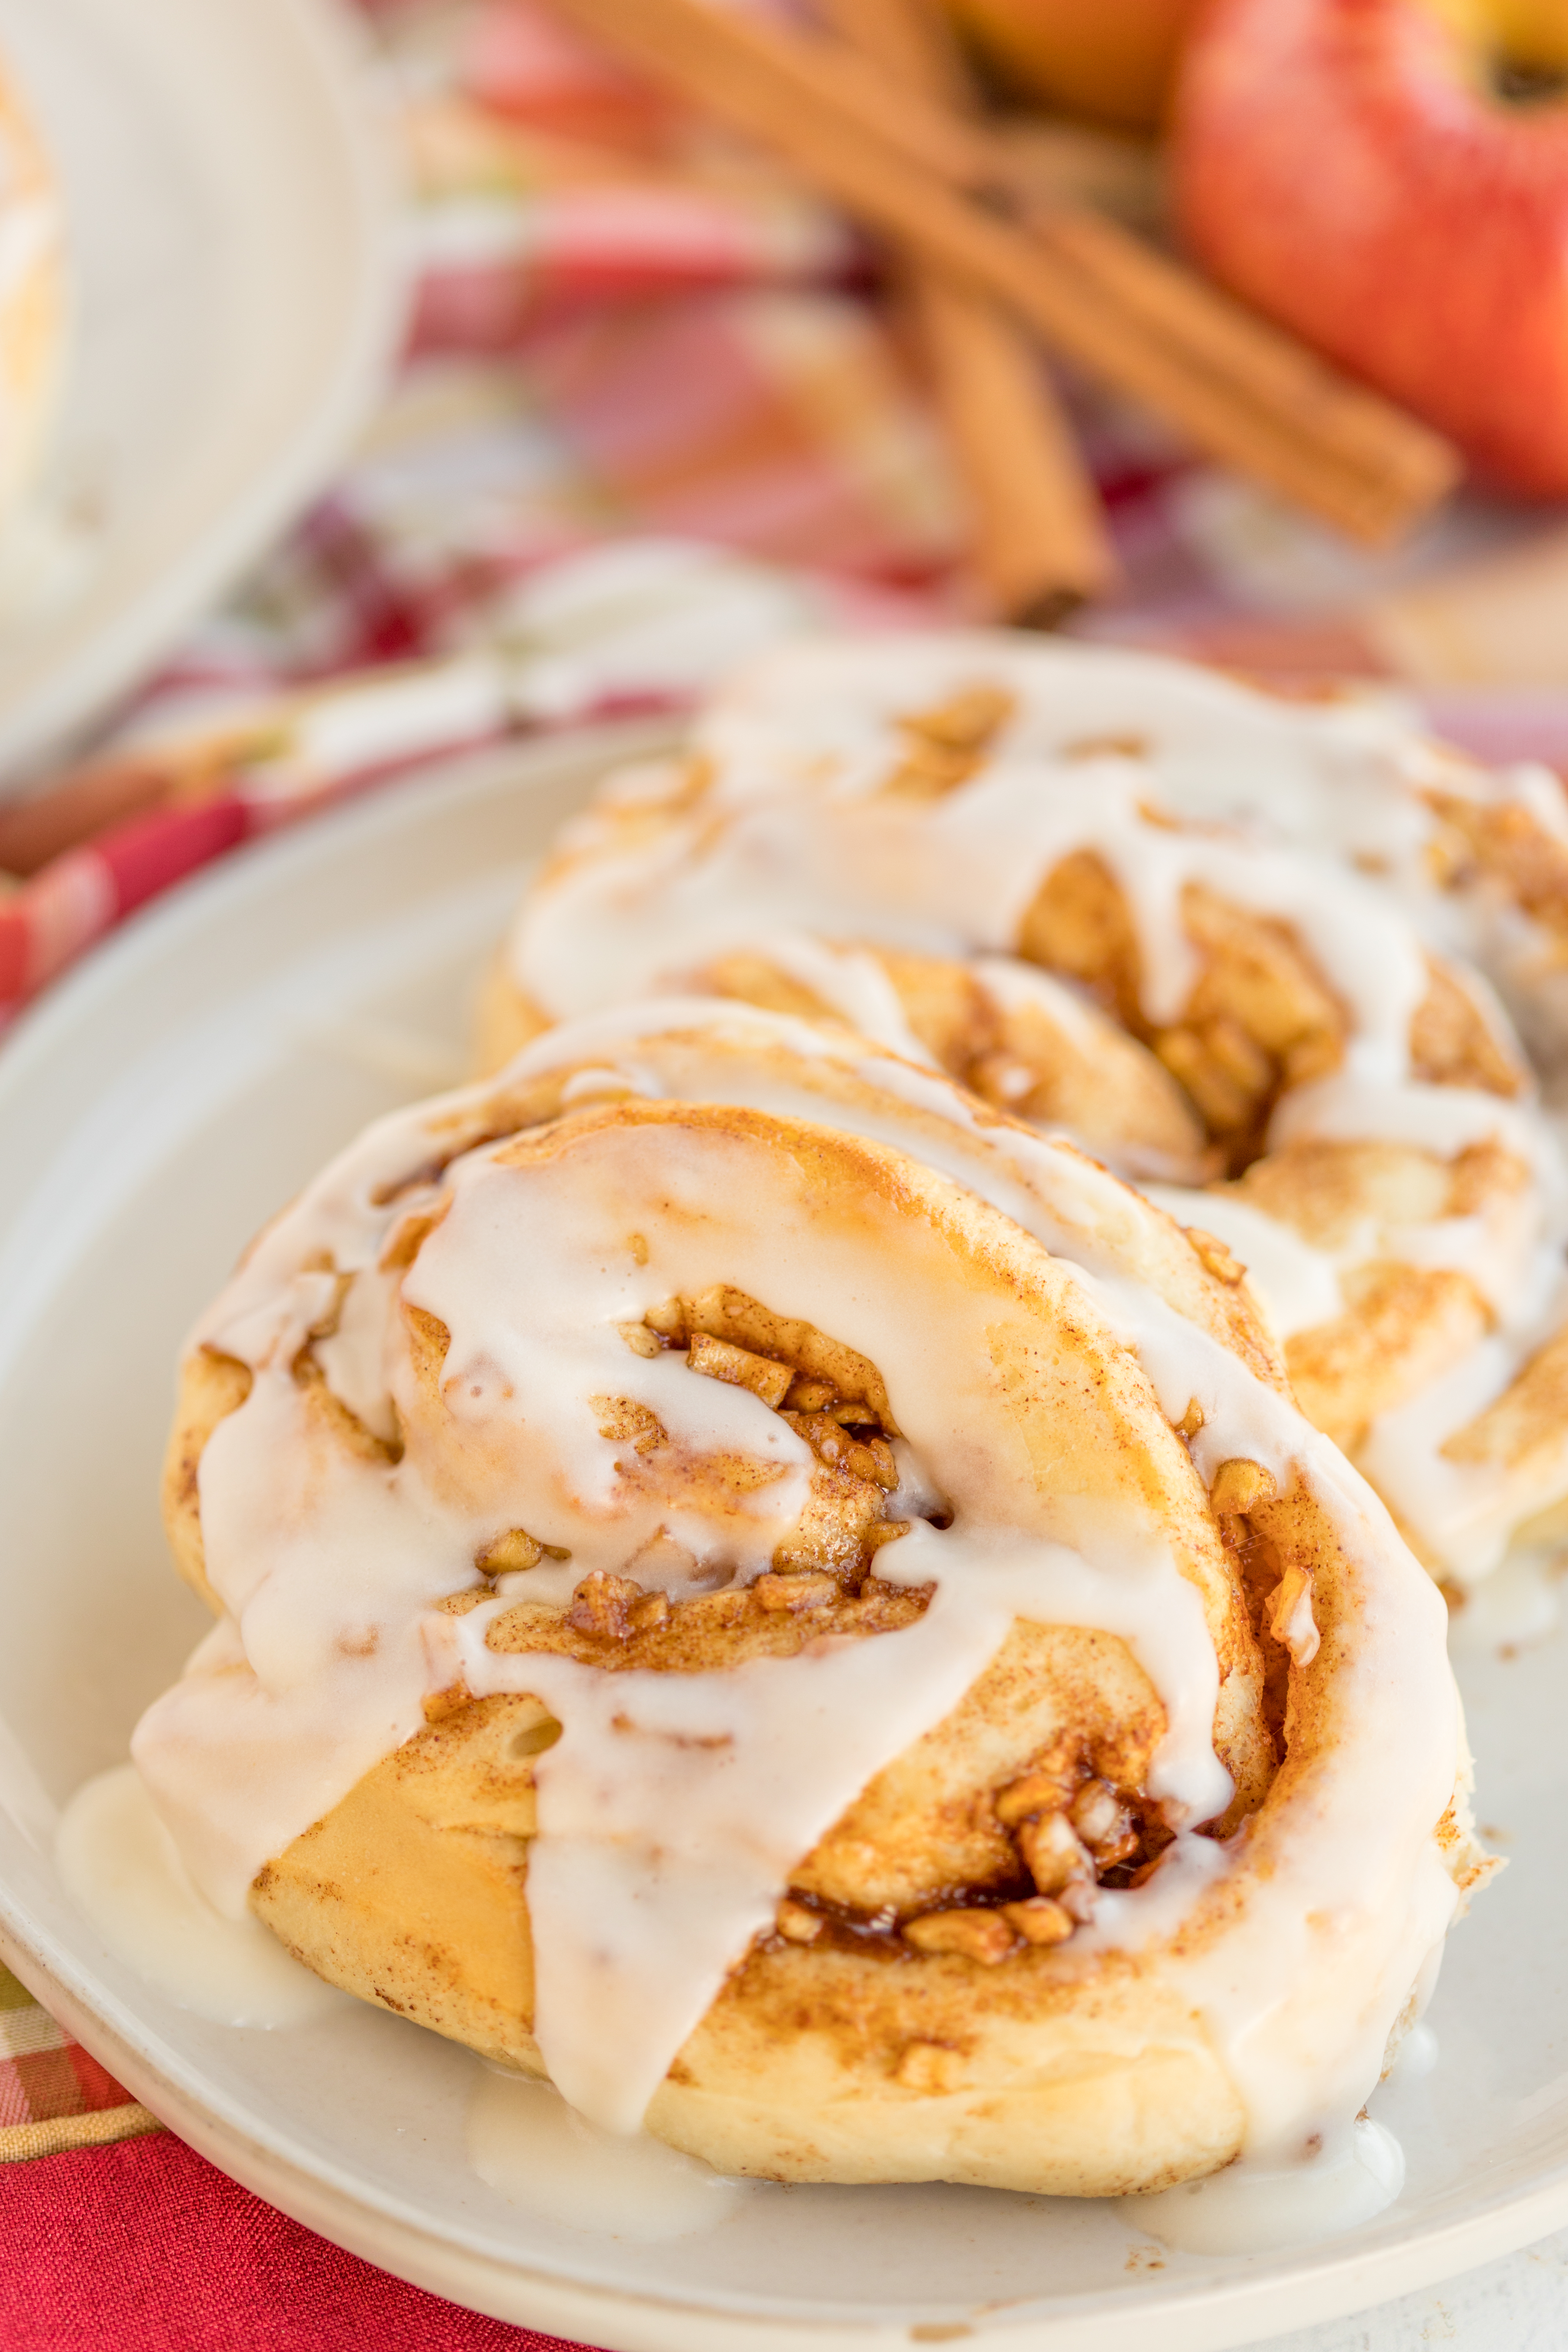 Apple Pie Cinnamon Rolls are a delicious twist on the classic cinnamon roll.  Spices like cinnamon, brown sugar, and bits of apples makes this a delicious fall dessert.